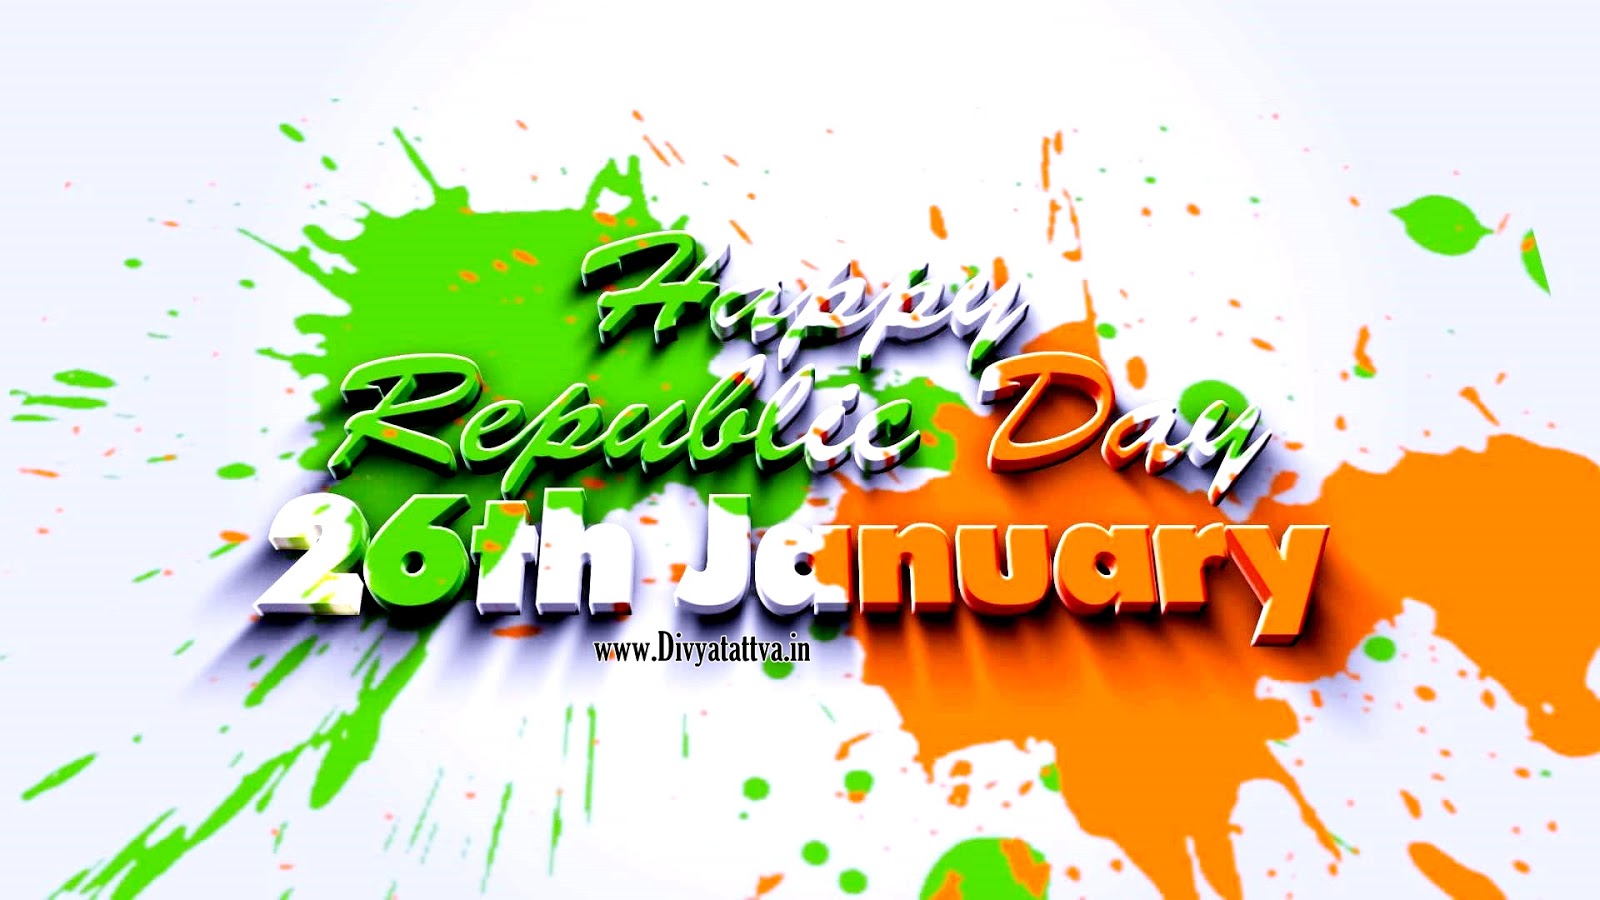 Happy Republic Day 26th Jan Greetings Wallpapers Messages With Images